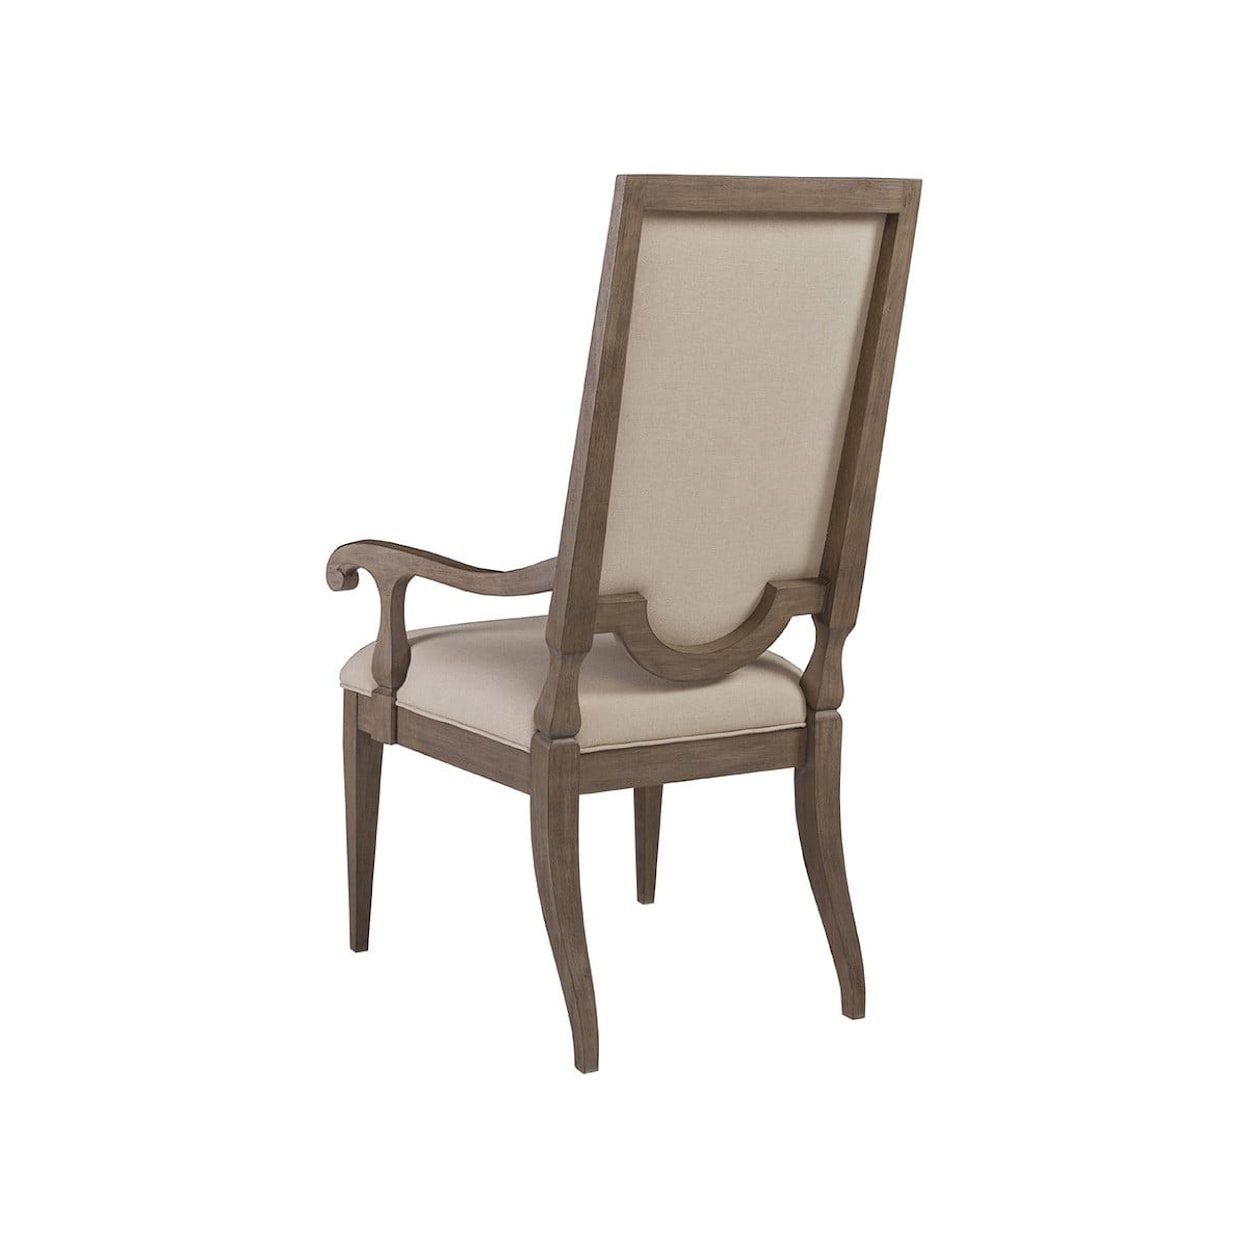 Artistica Cohesion Beauvoir Upholstered Arm Chair